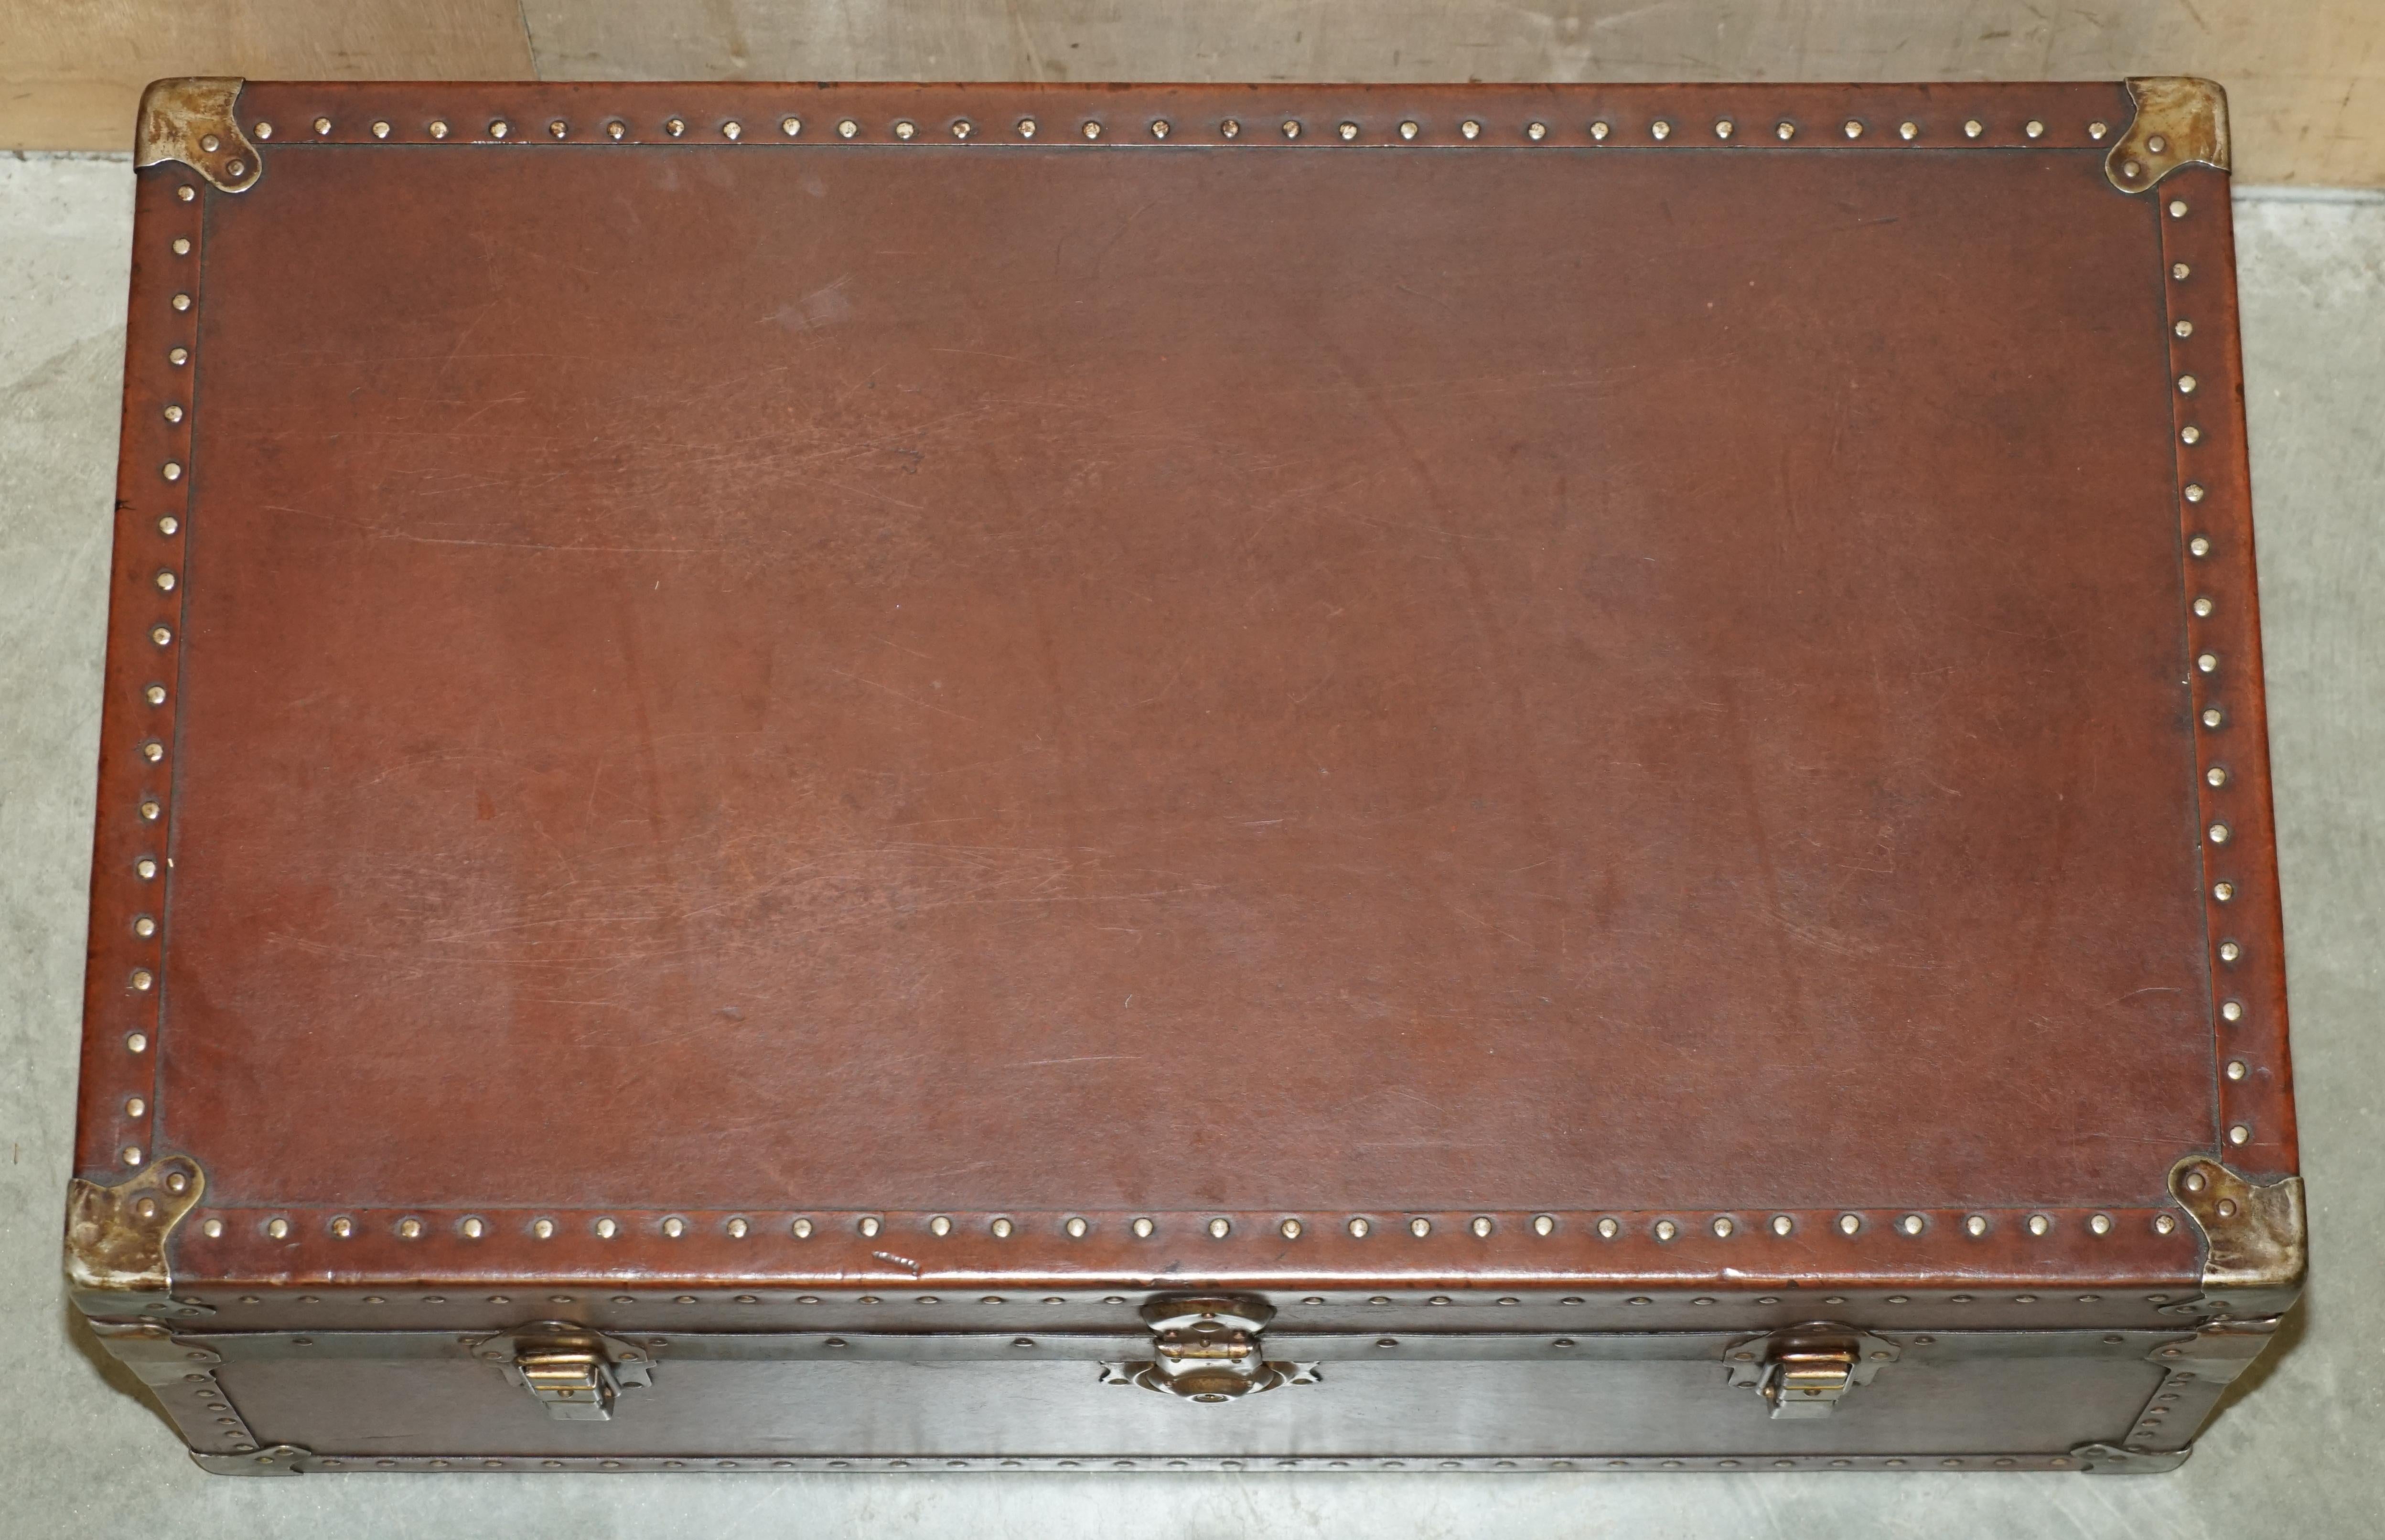 Leather ANTIQUE BROWN LEATHER STEAMER TRUNK COFFEE TABLE WiTH REMOVABLE INTERNAL SHELF For Sale